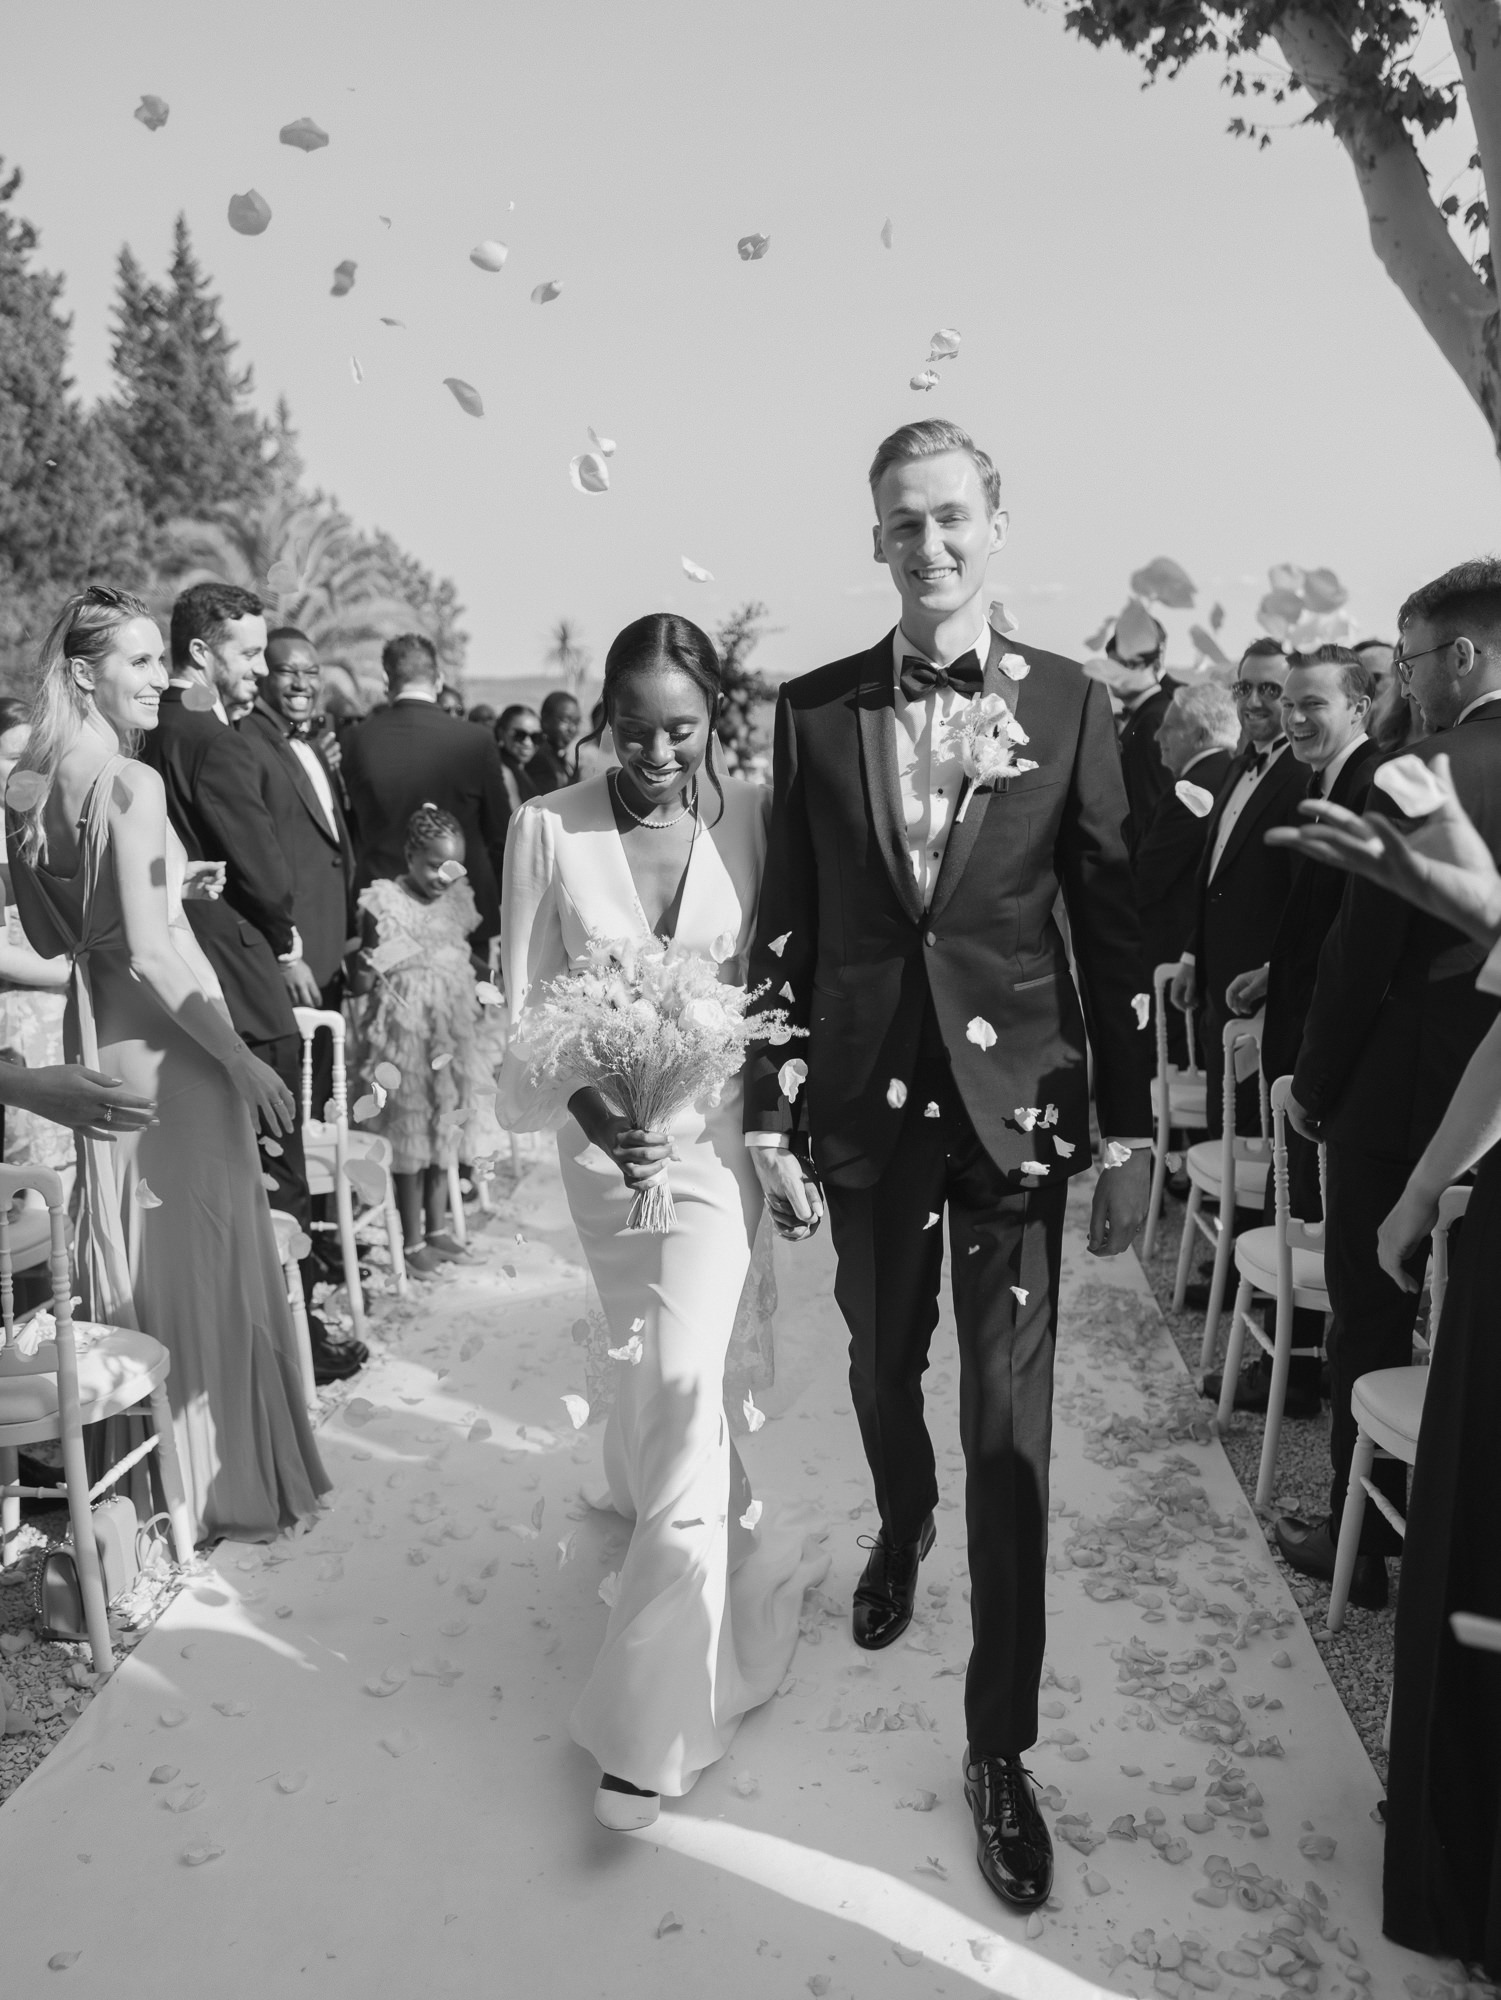 Couple picture in black & white exiting the ceremony at Bastide Saint Antoine